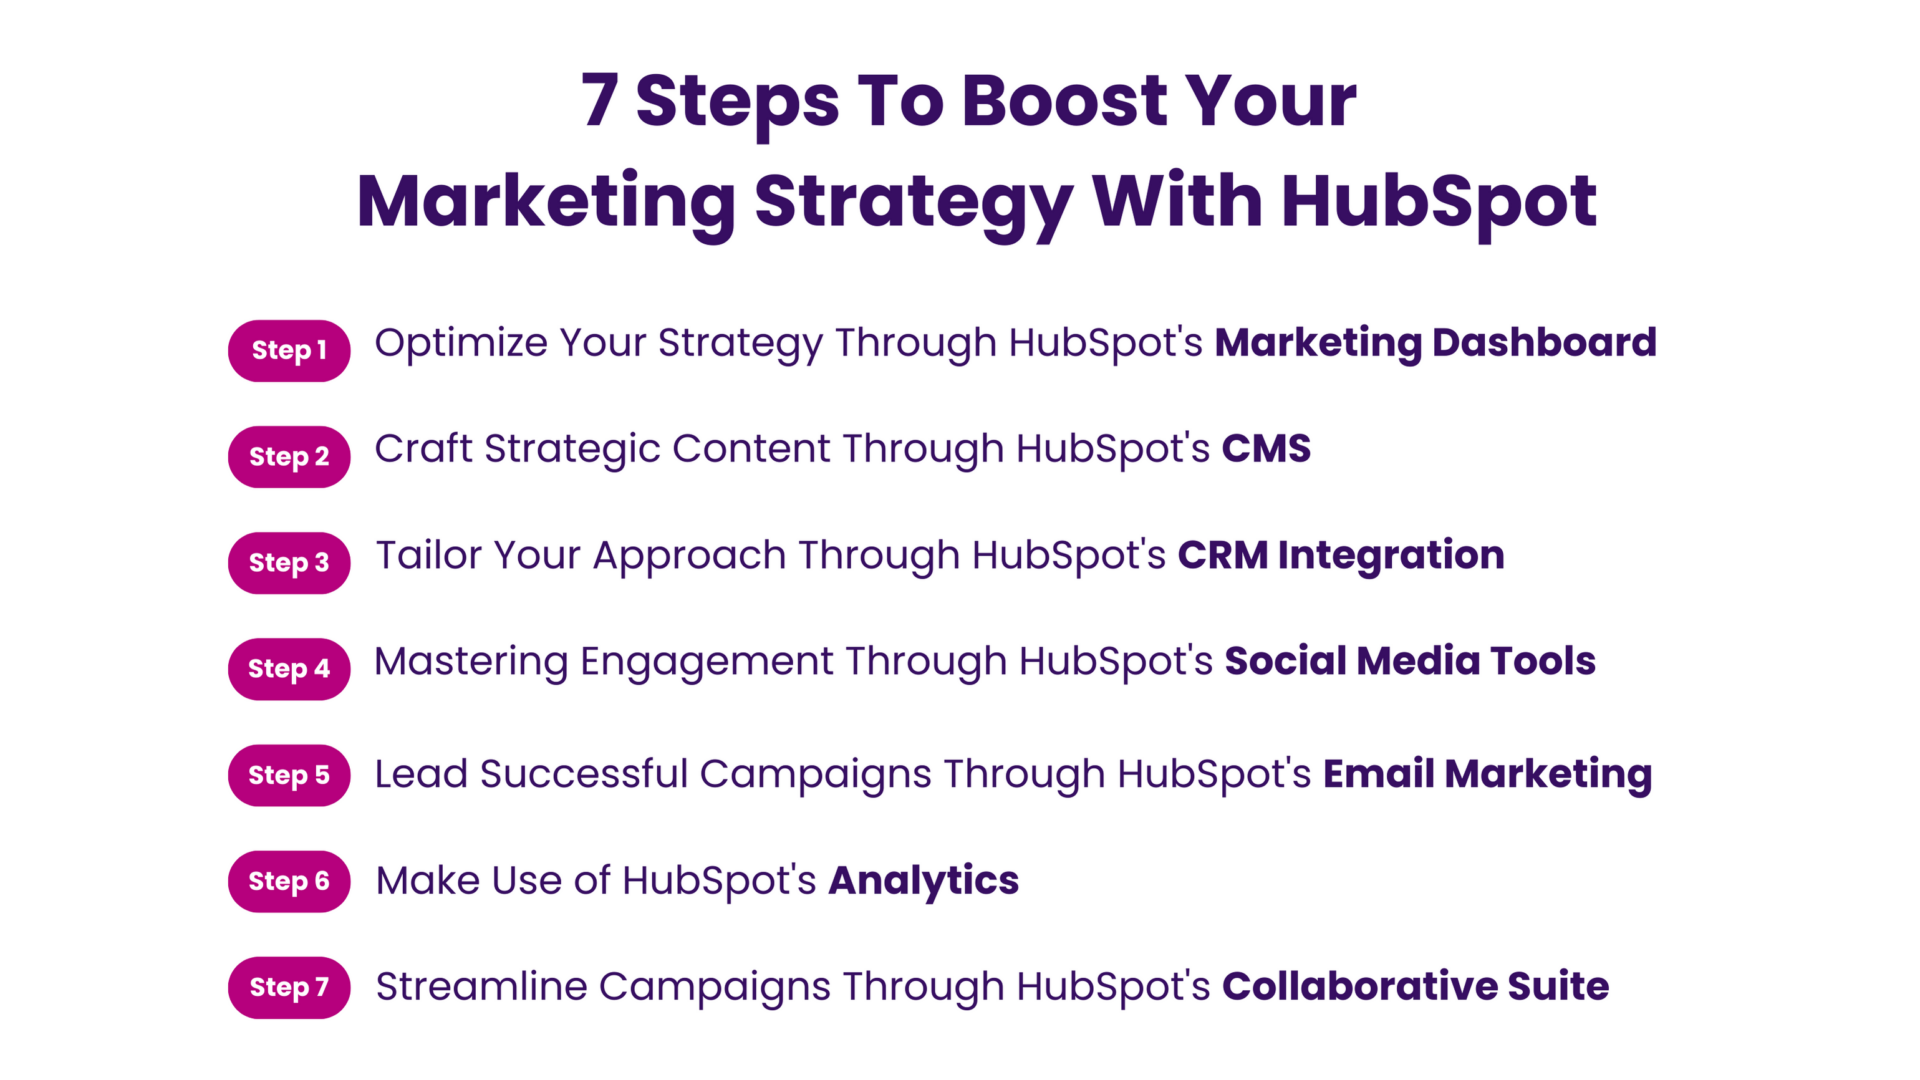 7 Steps To Boost Your Marketing Strategy With HubSpot